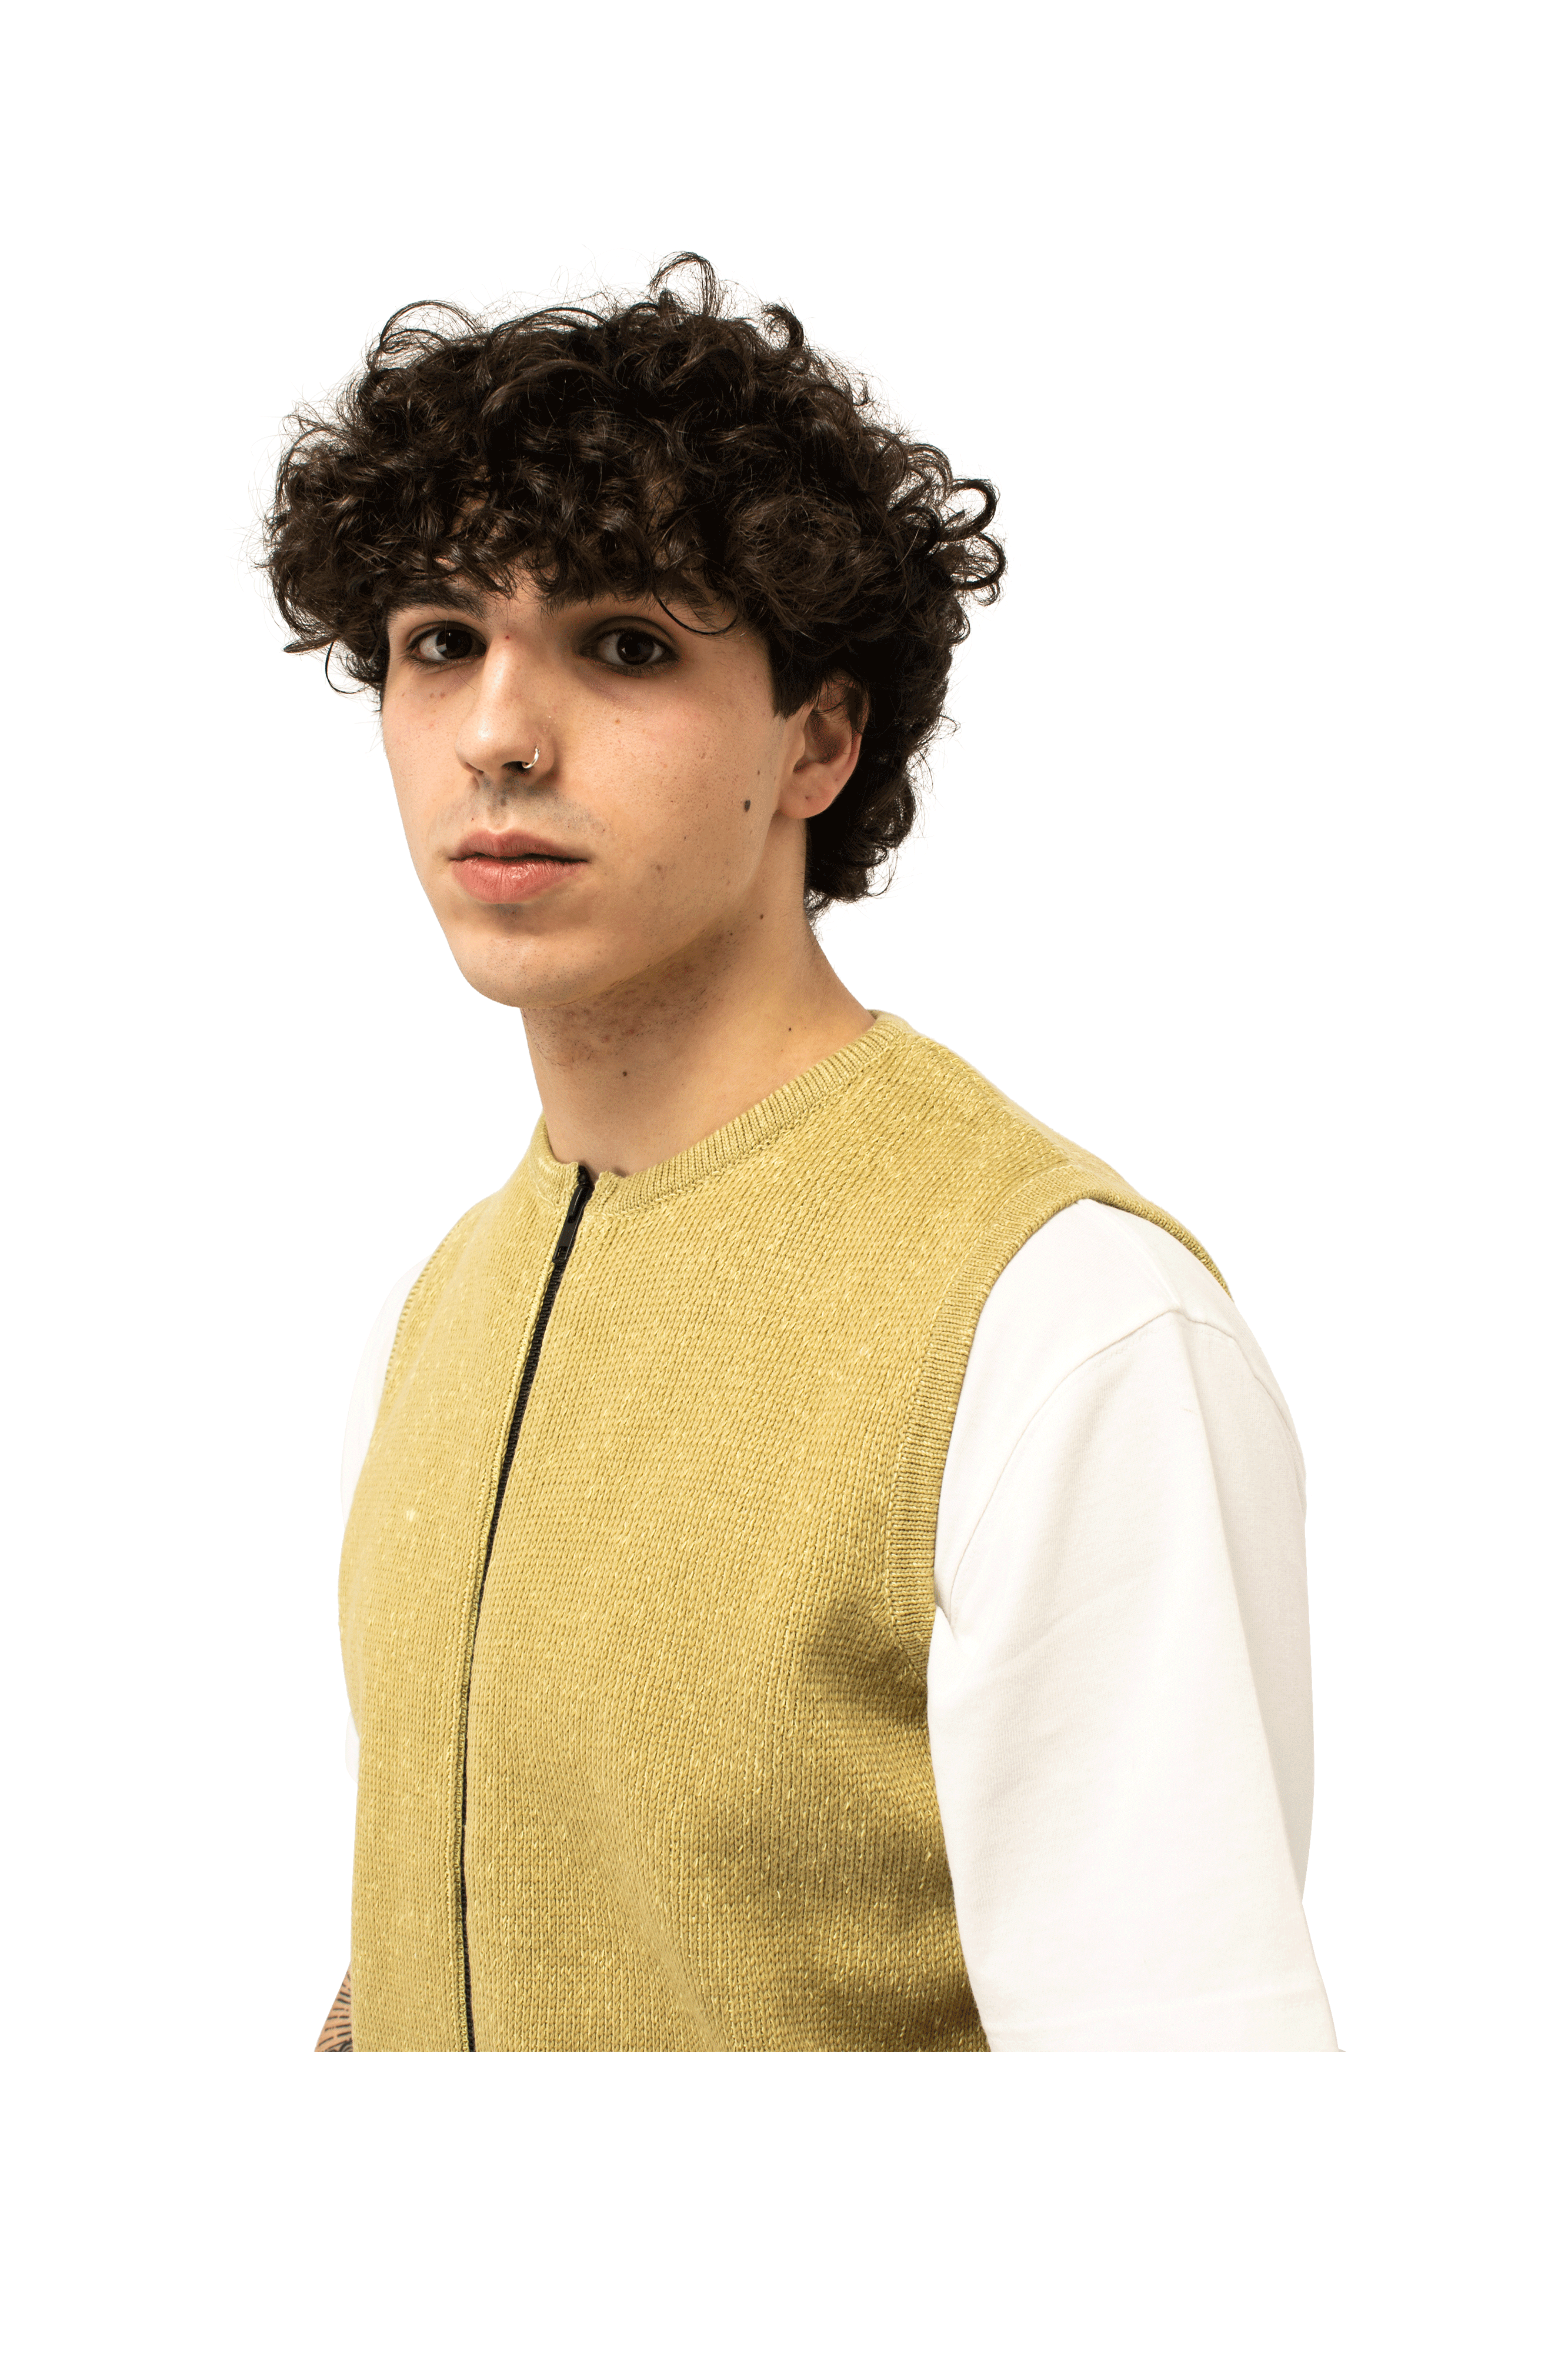 Aimless Compact Knit Vest